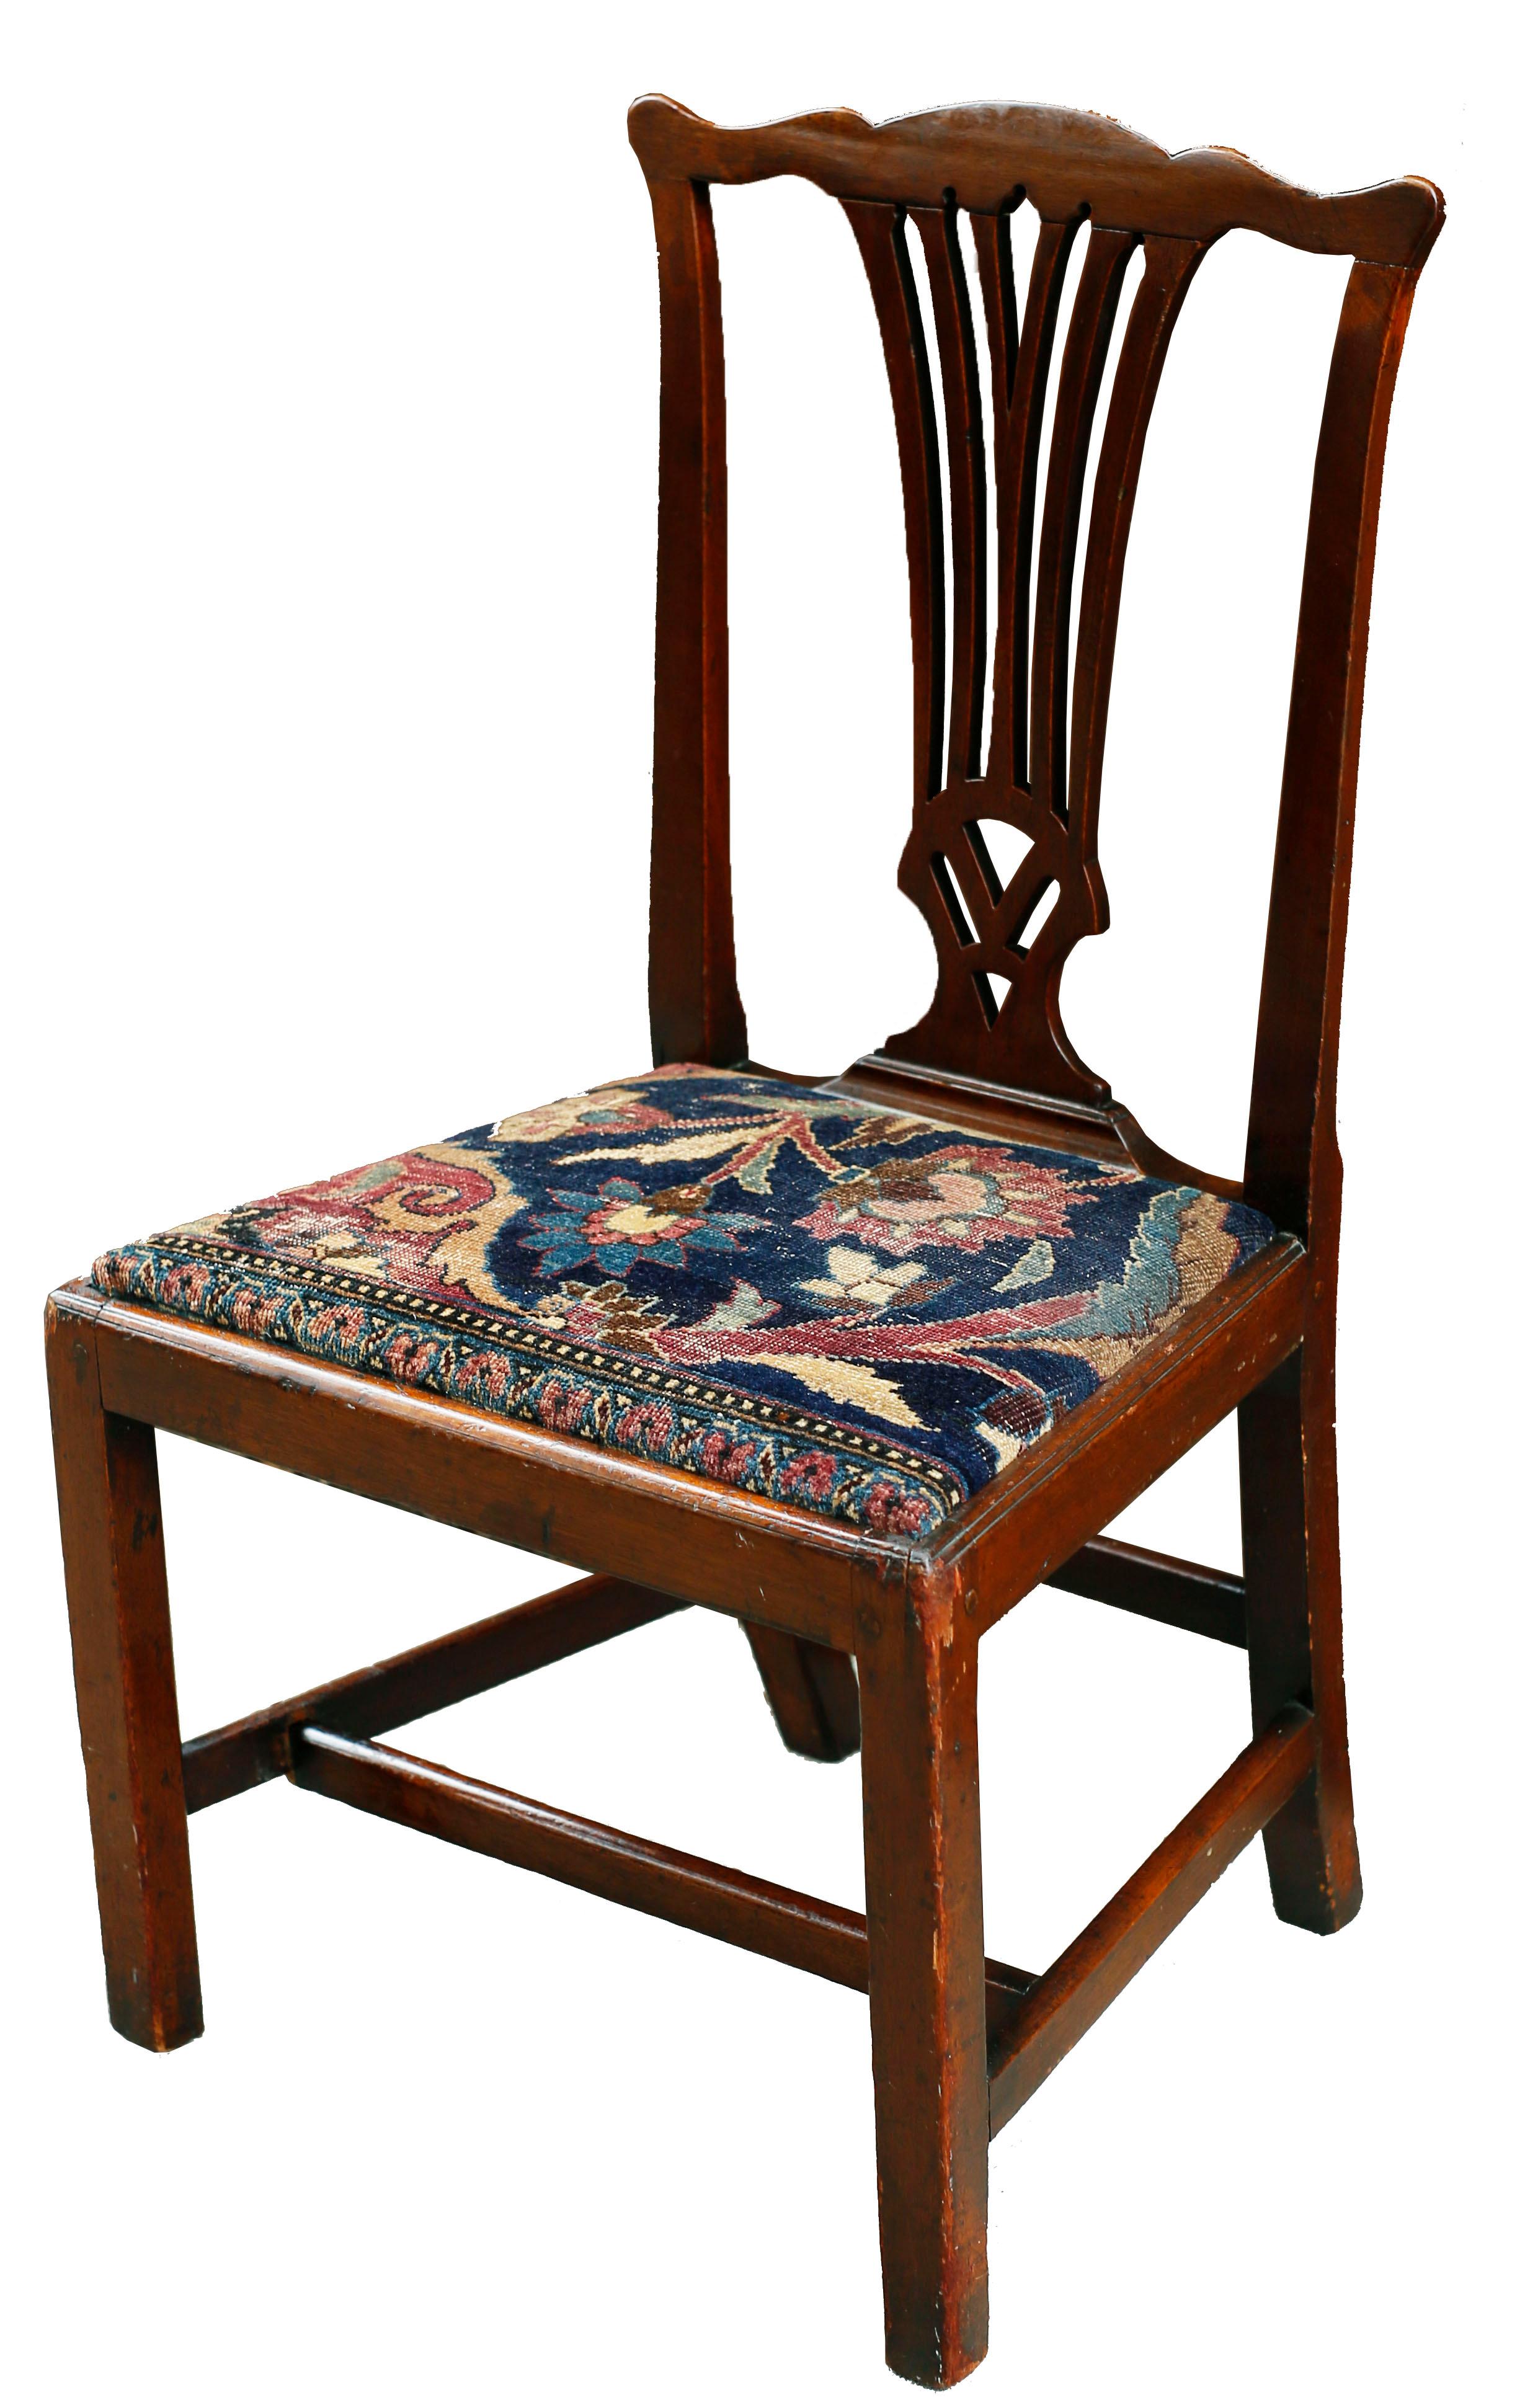 American Colonial Mid-18th Century American Walnut Chippendale Chairs with Ushak Seats